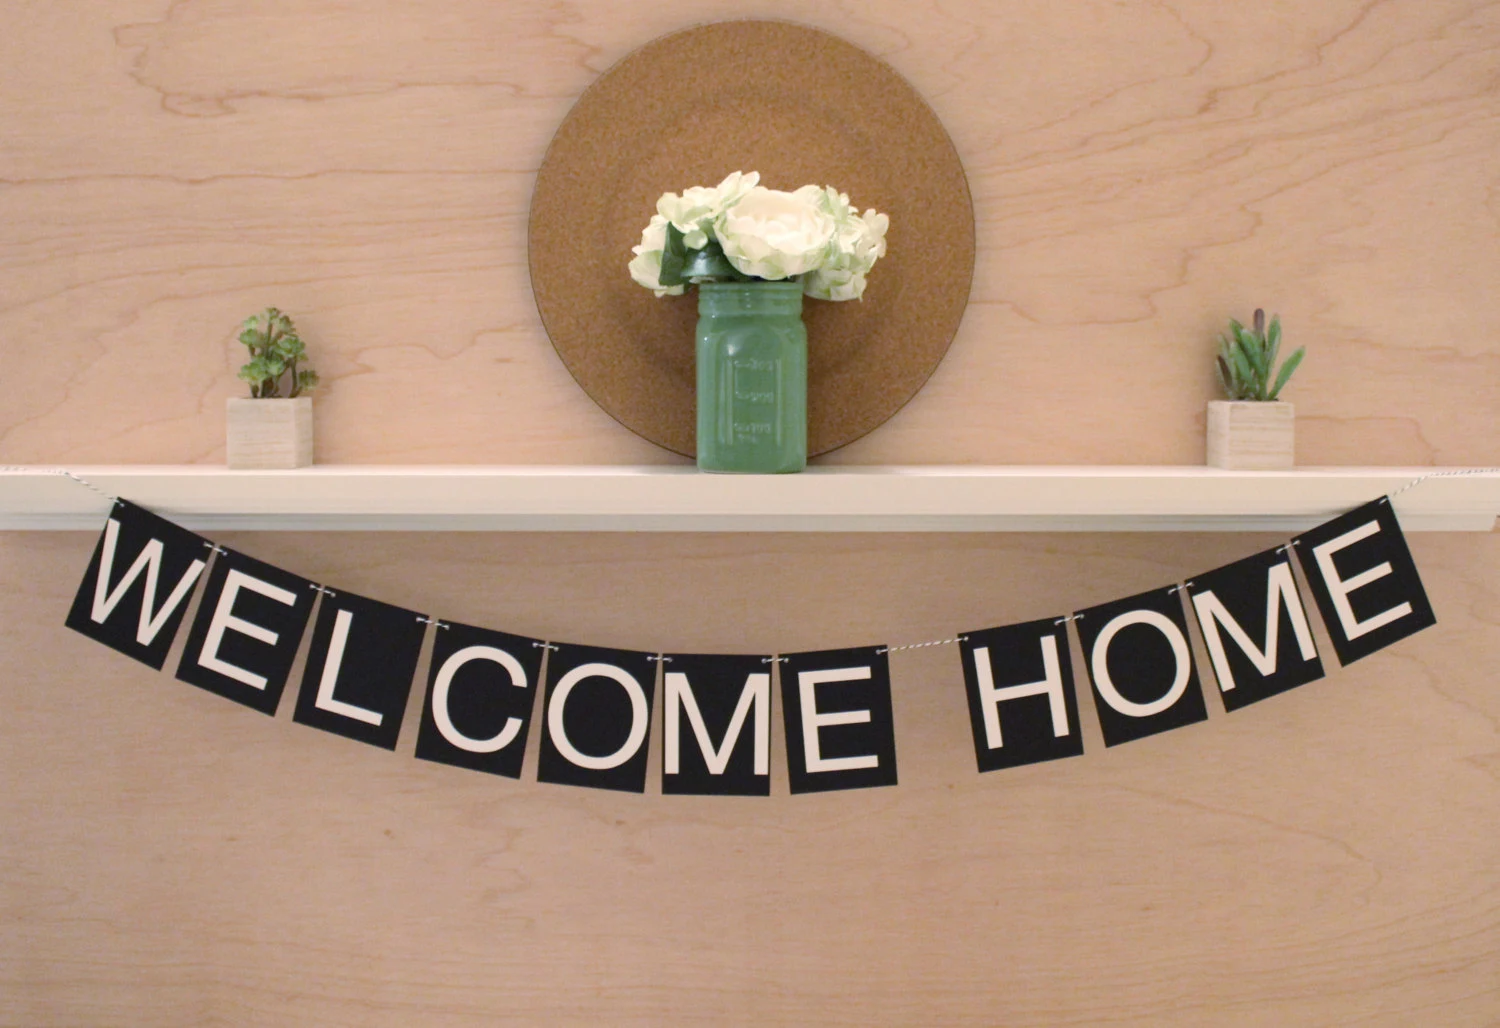 How to create a personalized welcome banner for your home